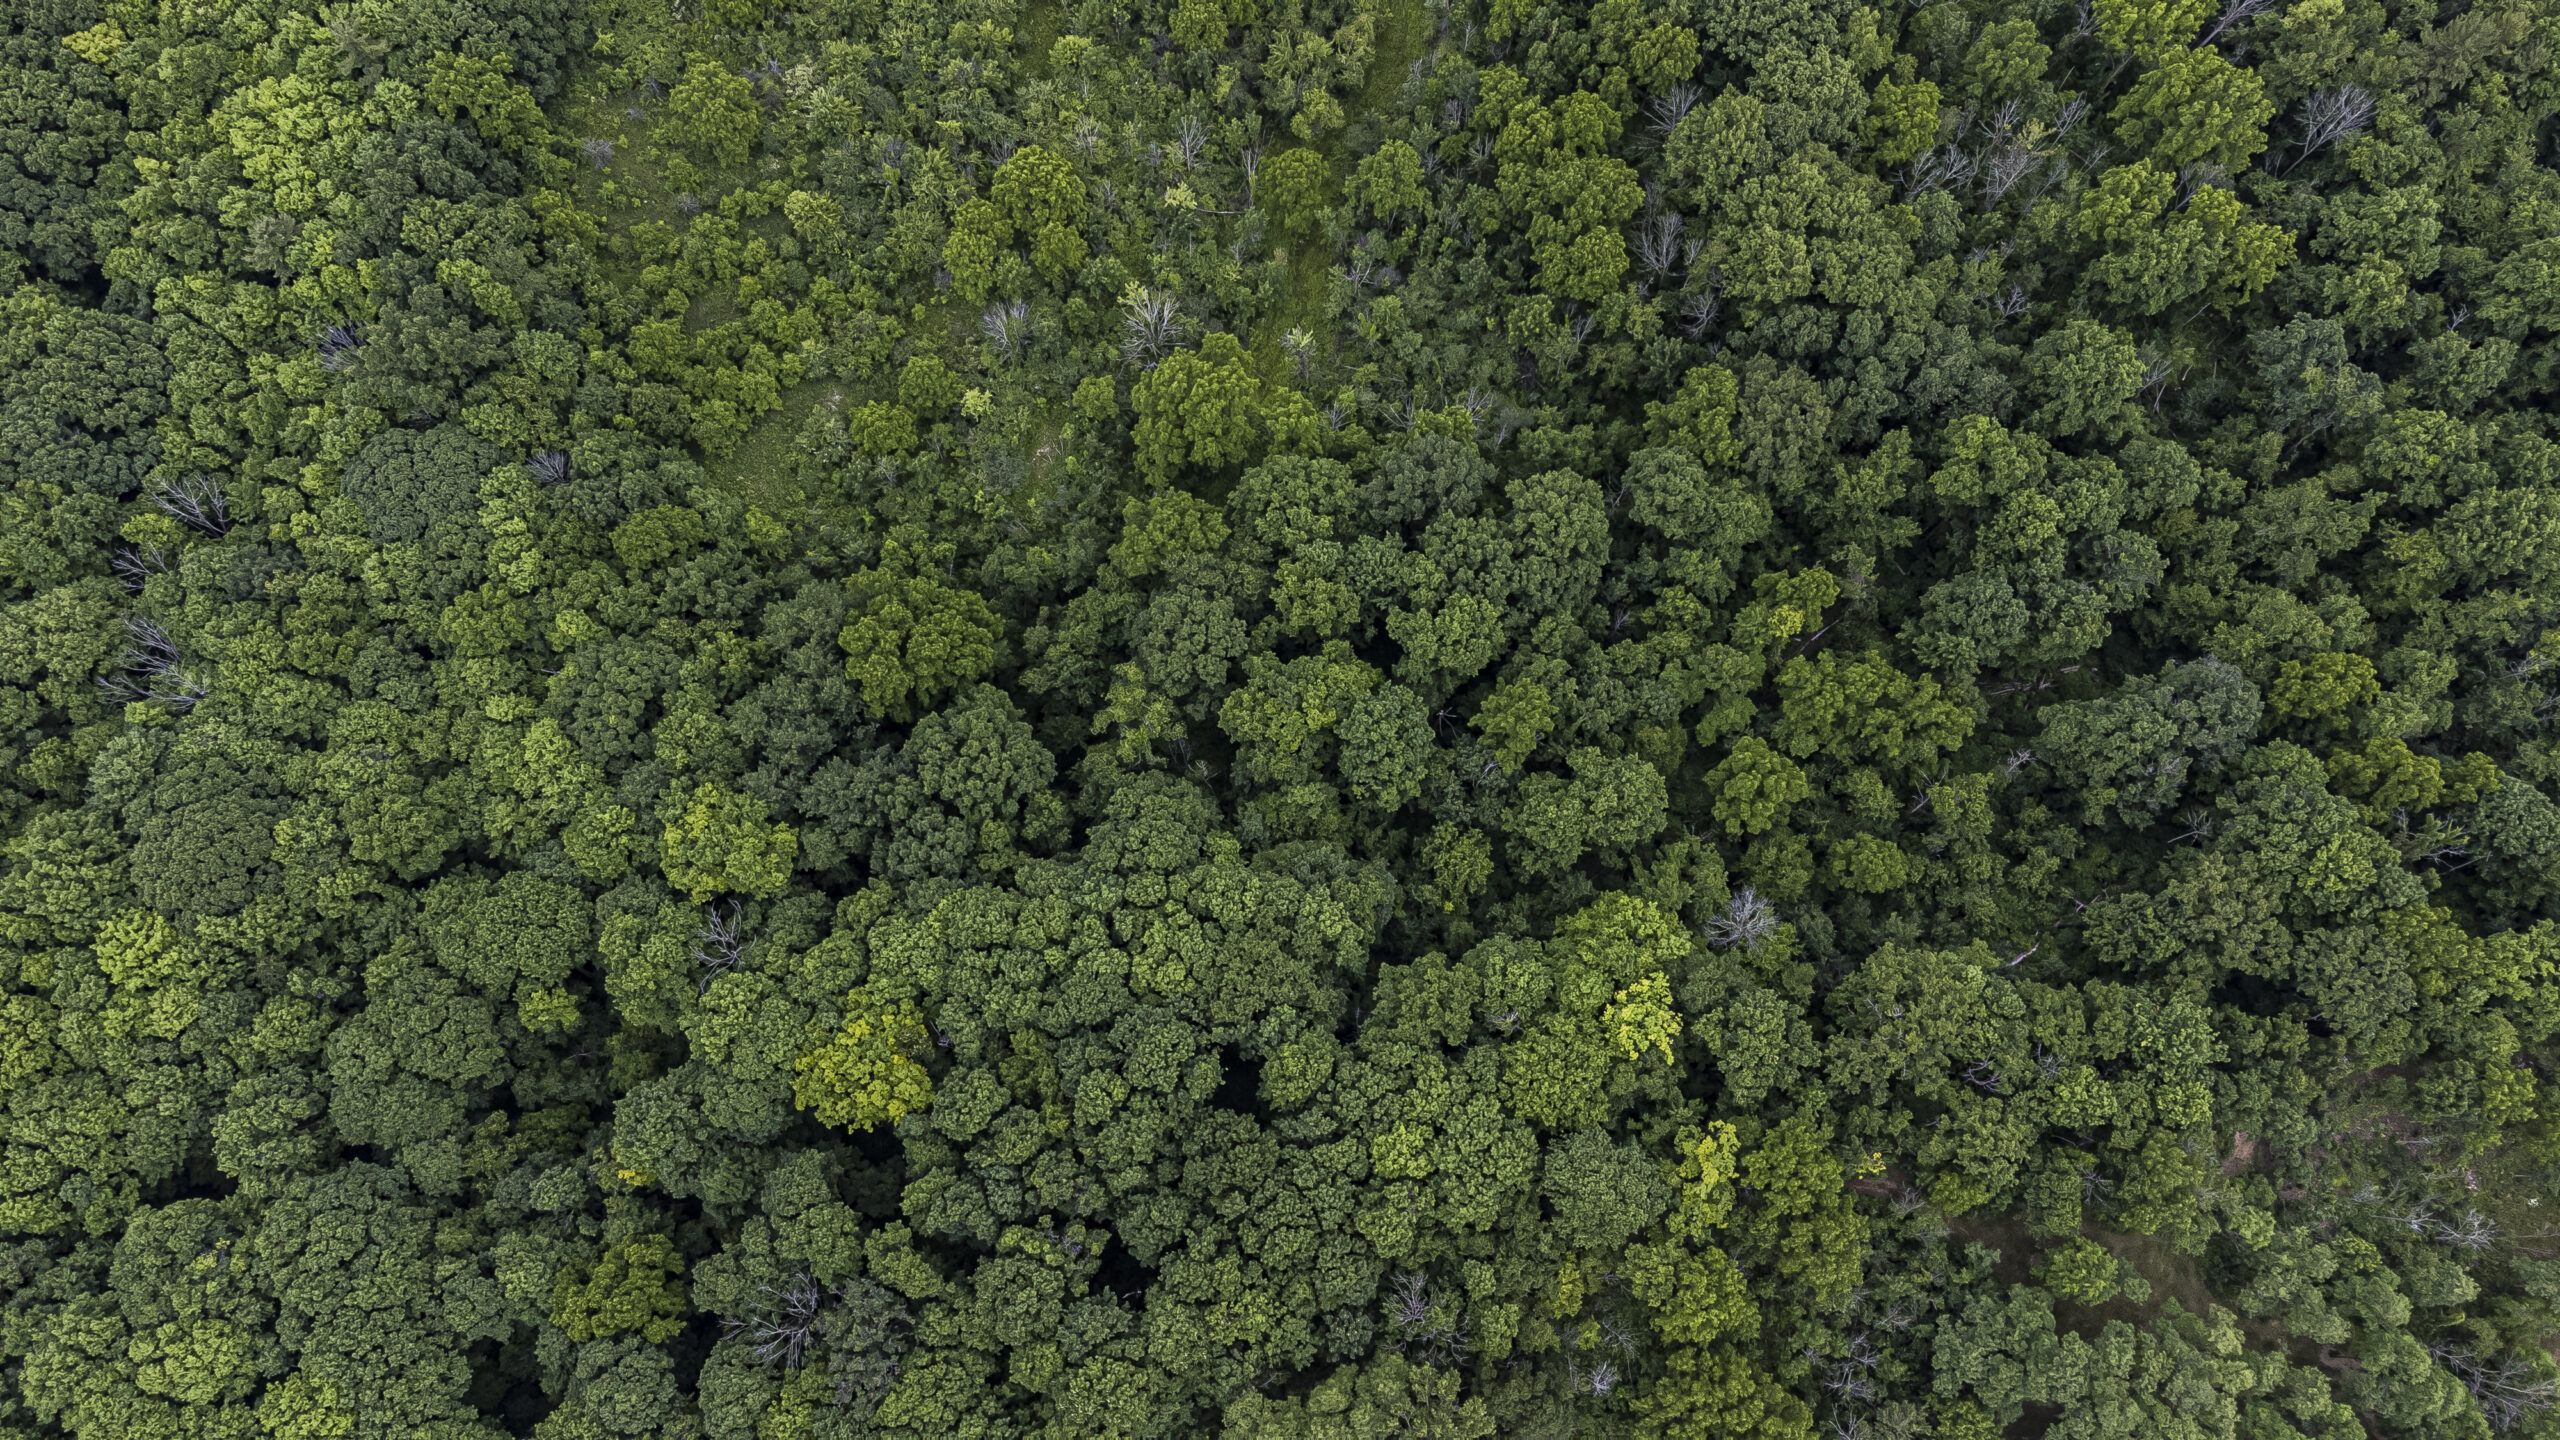 Ontario Greenbelt: An overhead view of forest